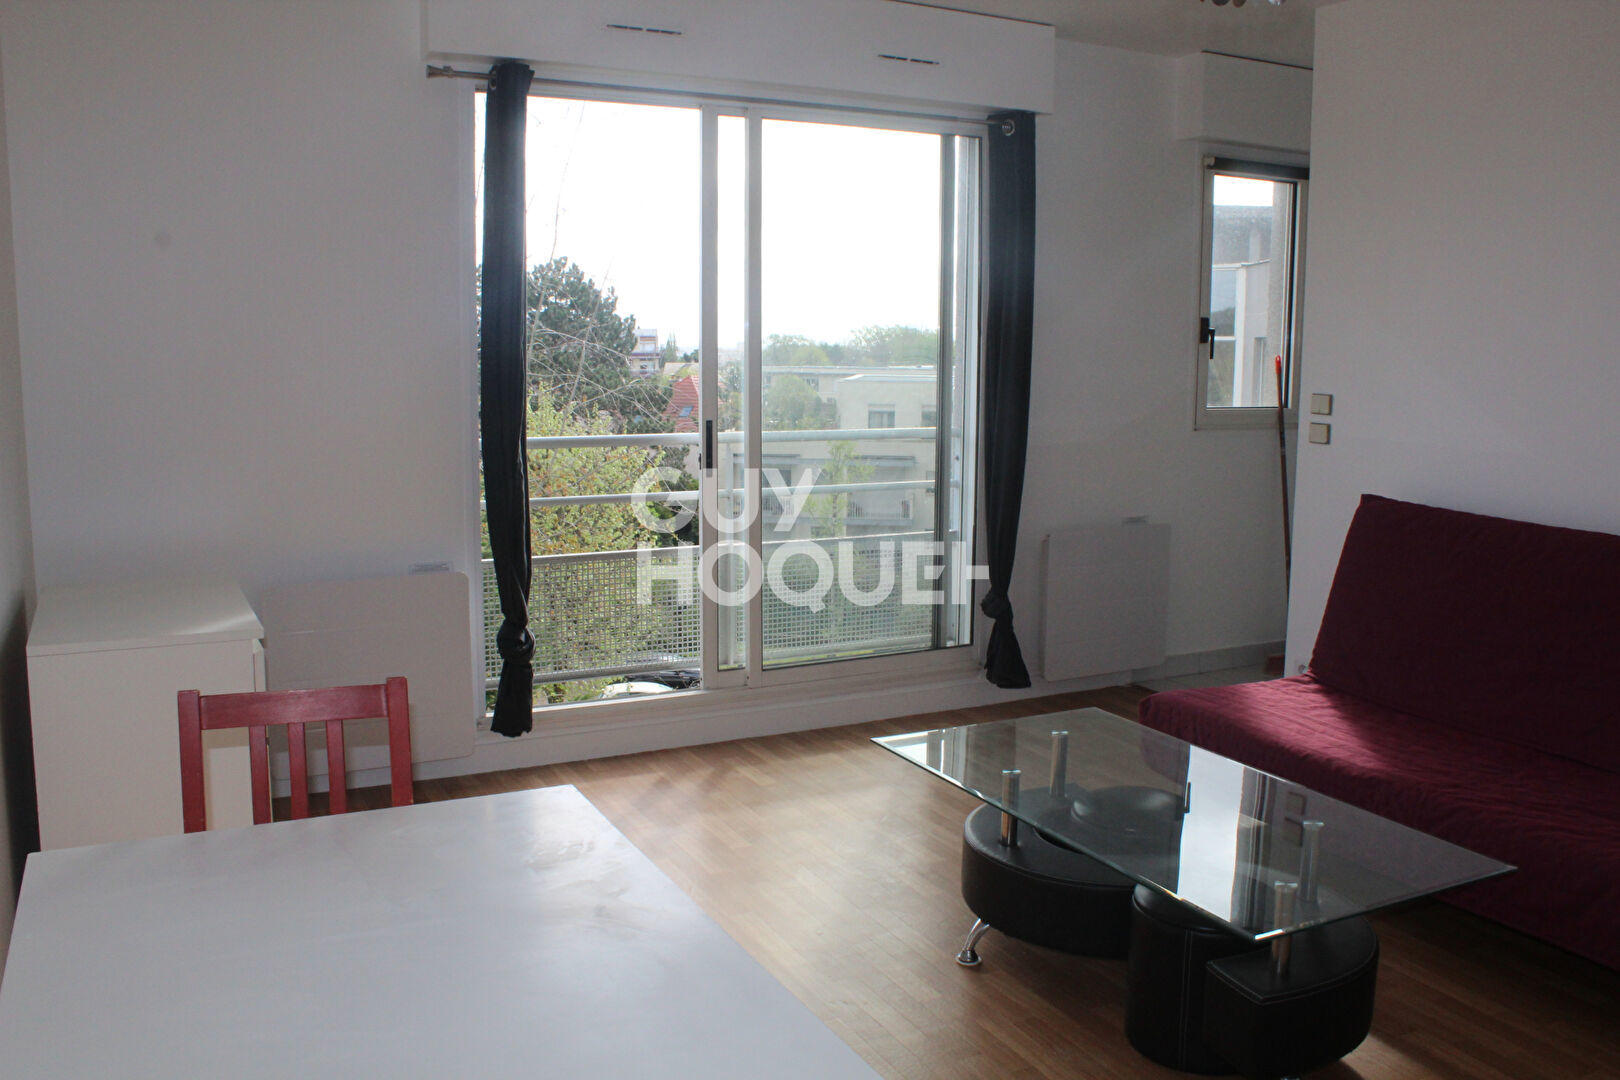 Appartement a louer chatenay-malabry - 1 pièce(s) - 29 m2 - Surfyn